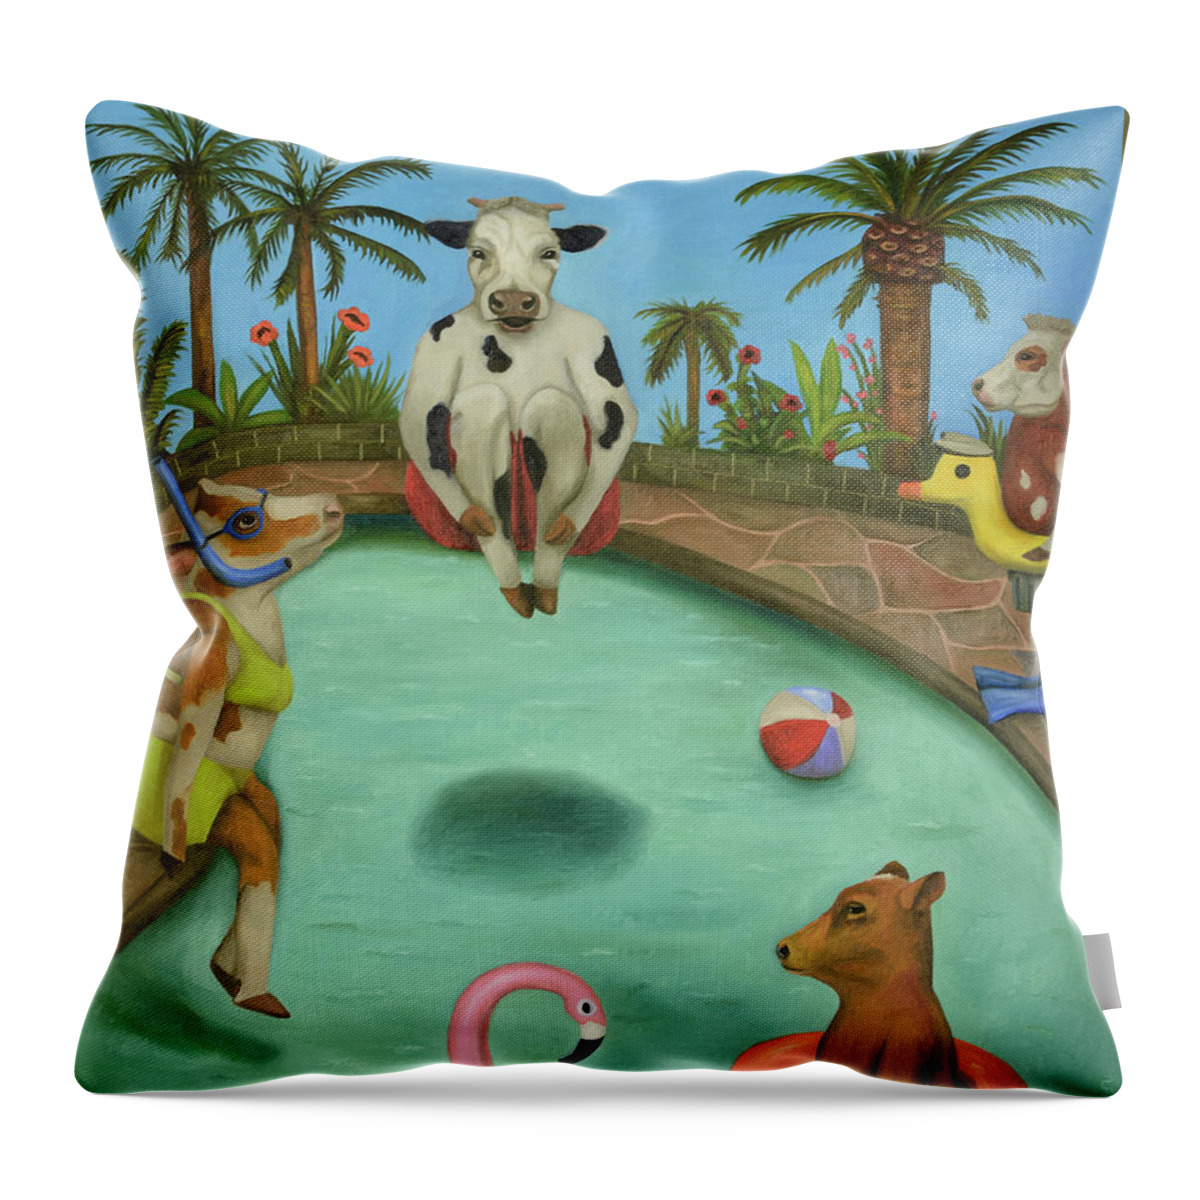 Cowabunga Throw Pillow featuring the painting Cowabunga by Leah Saulnier The Painting Maniac